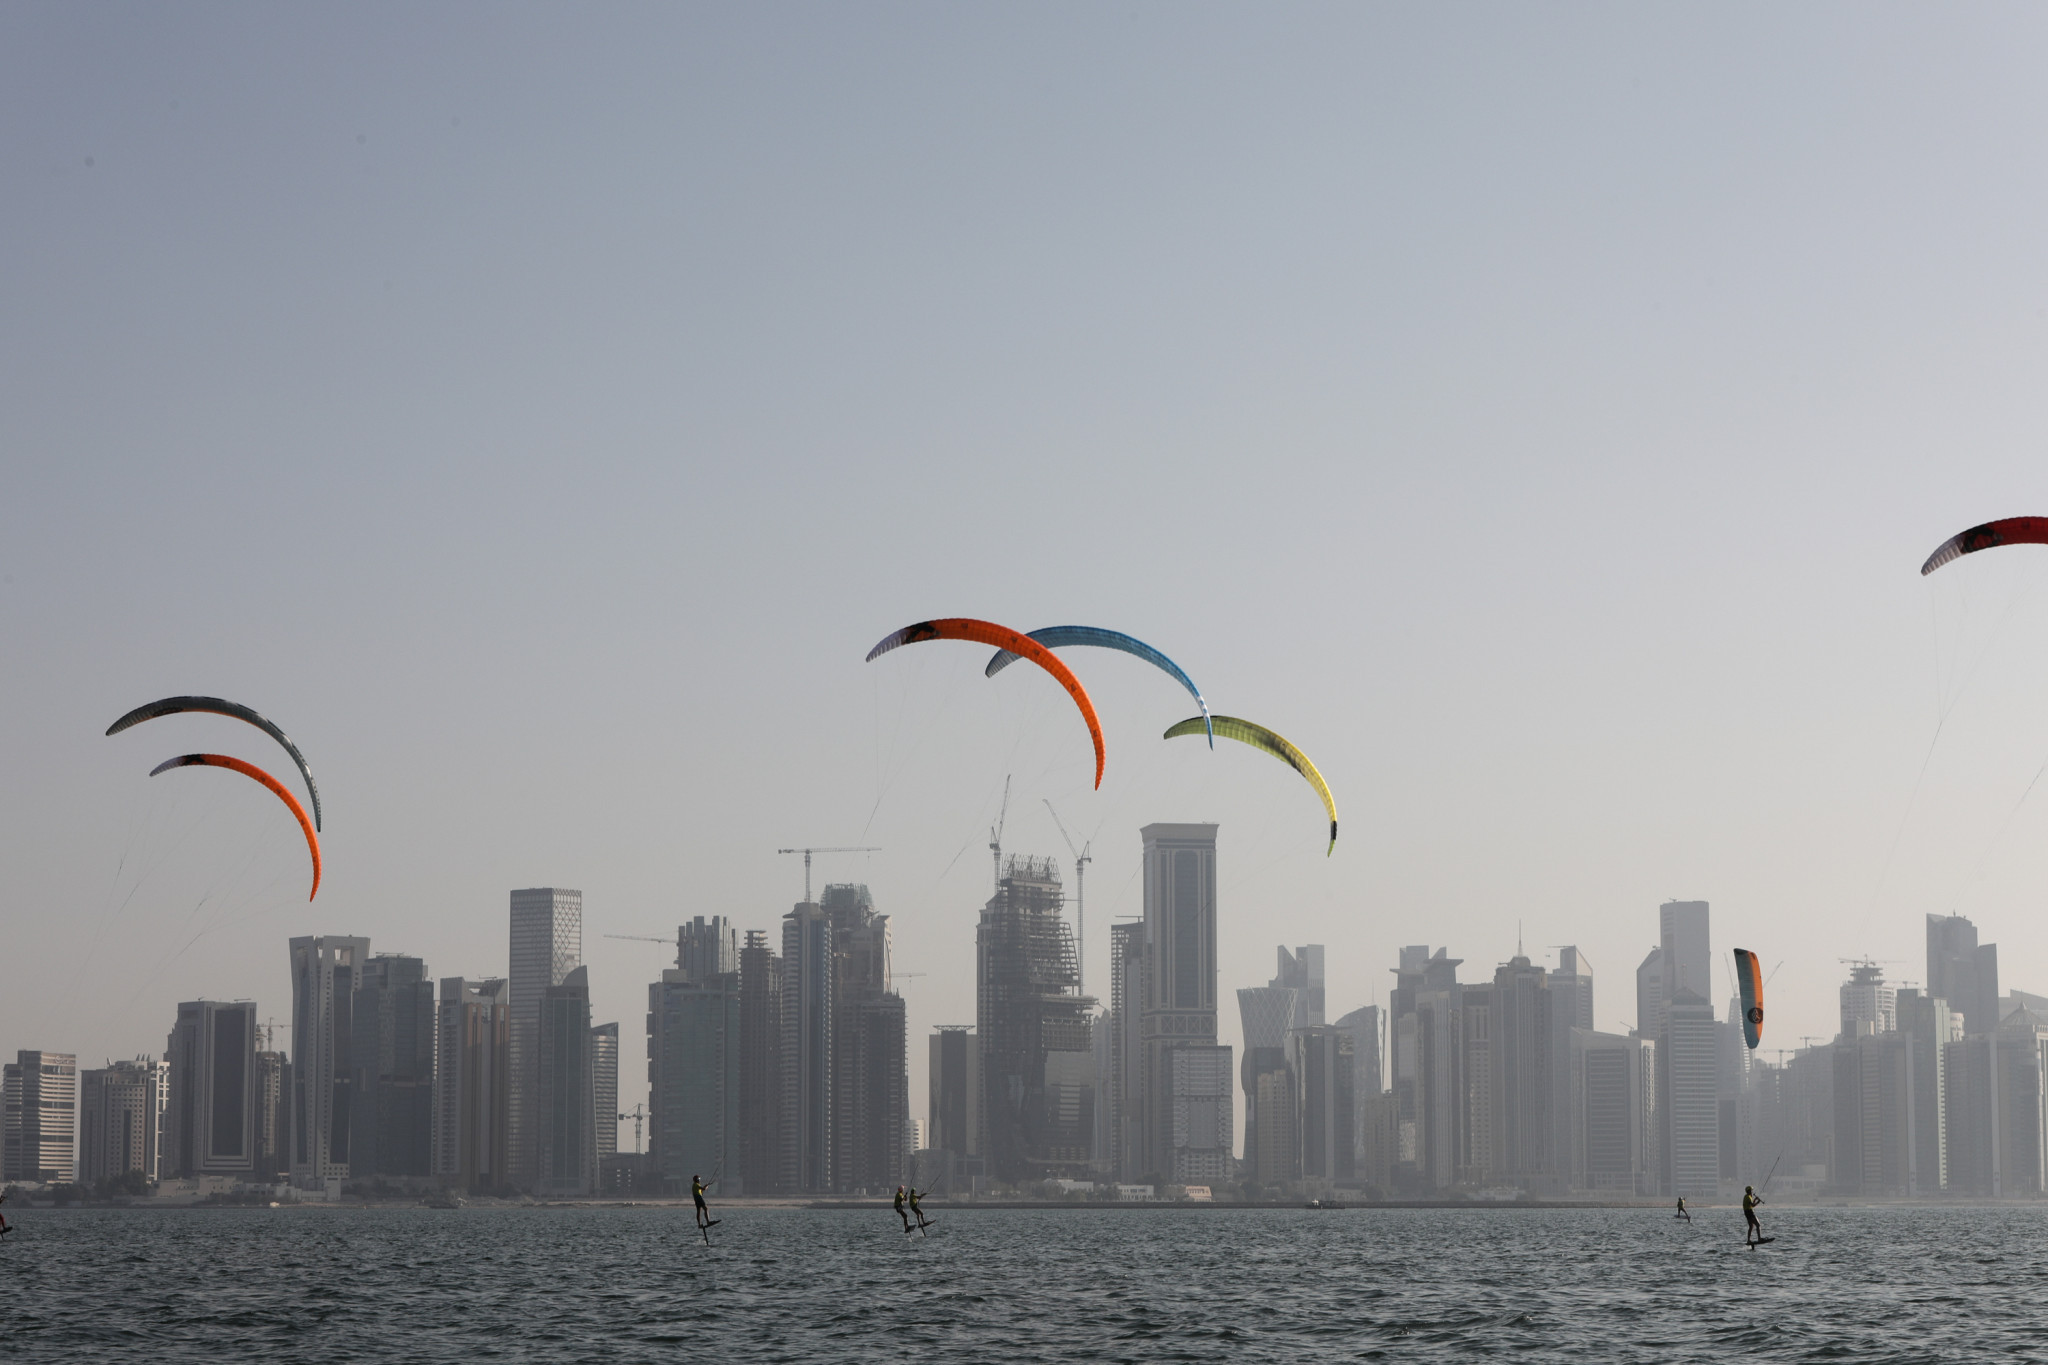 The women's kitefoil racing title was decided in front of Doha's skyline ©ANOC